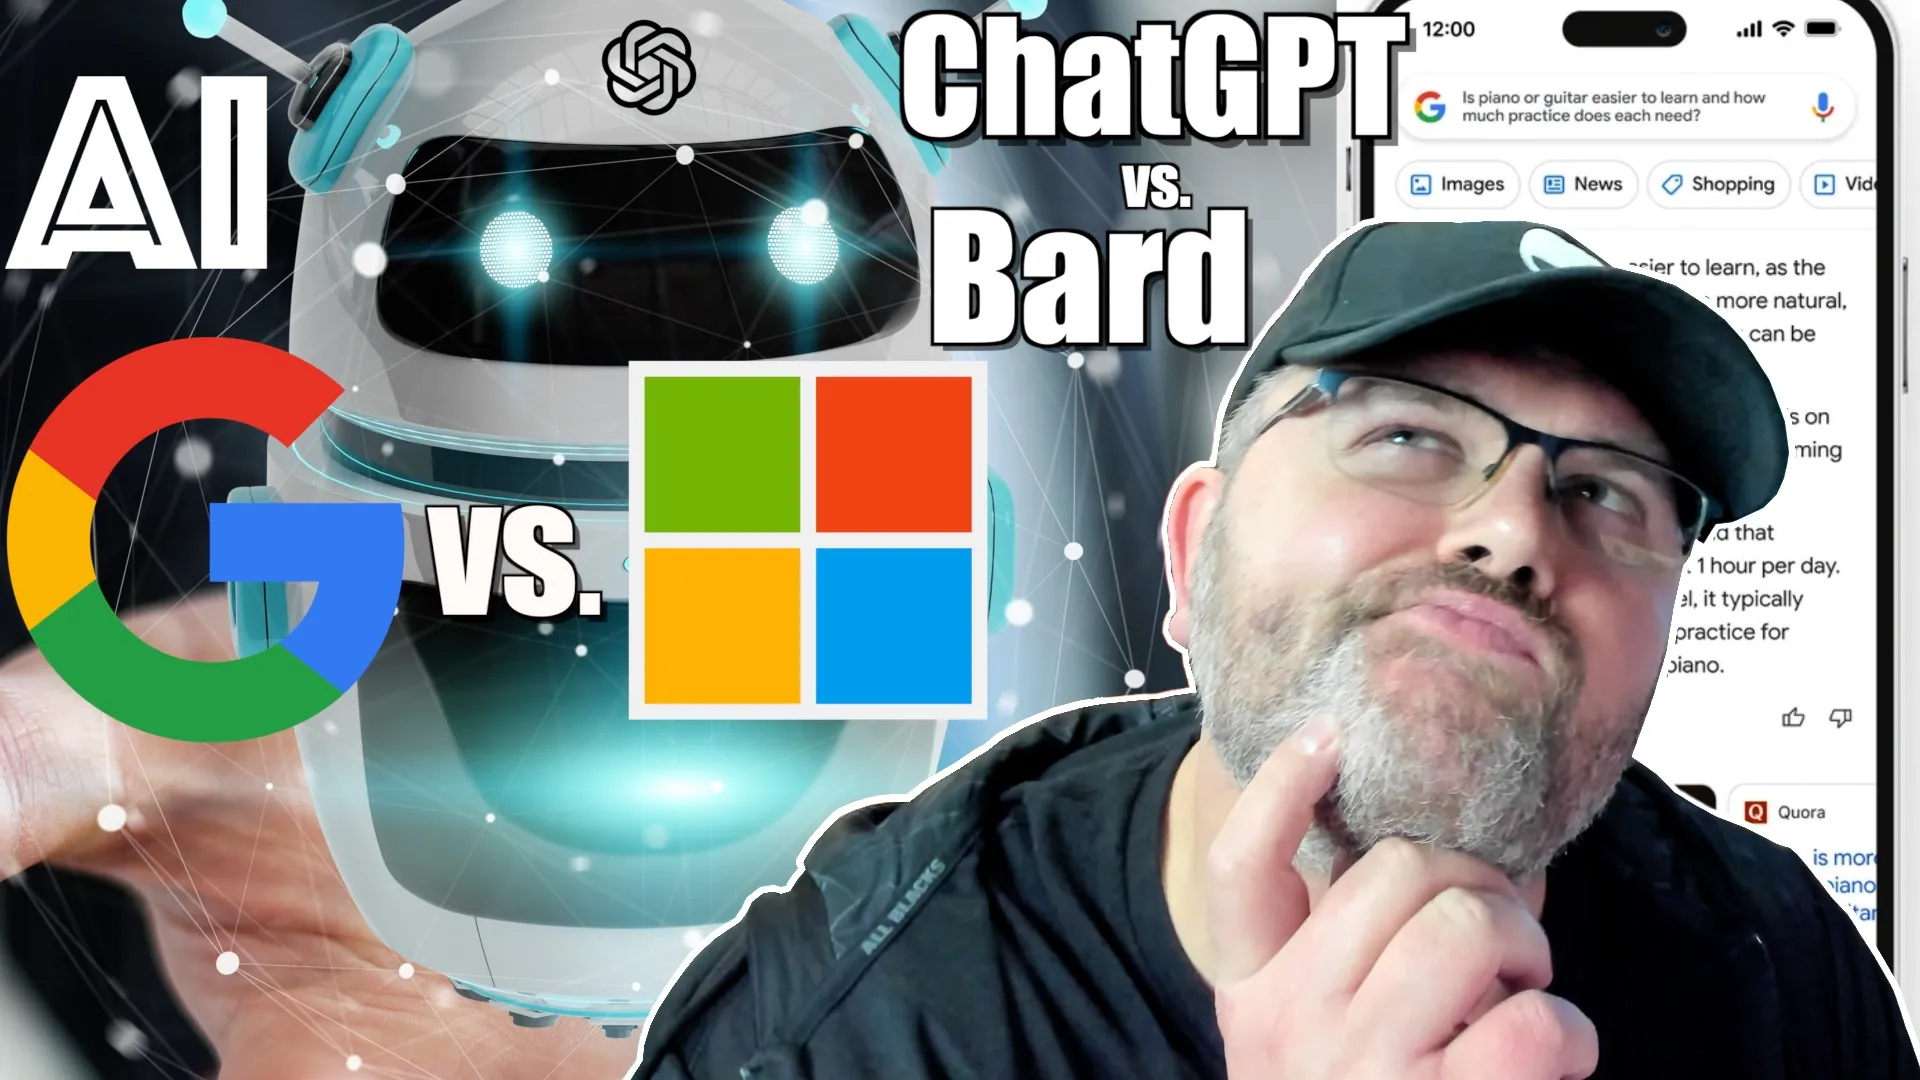 how is Bard different from ChatGPT